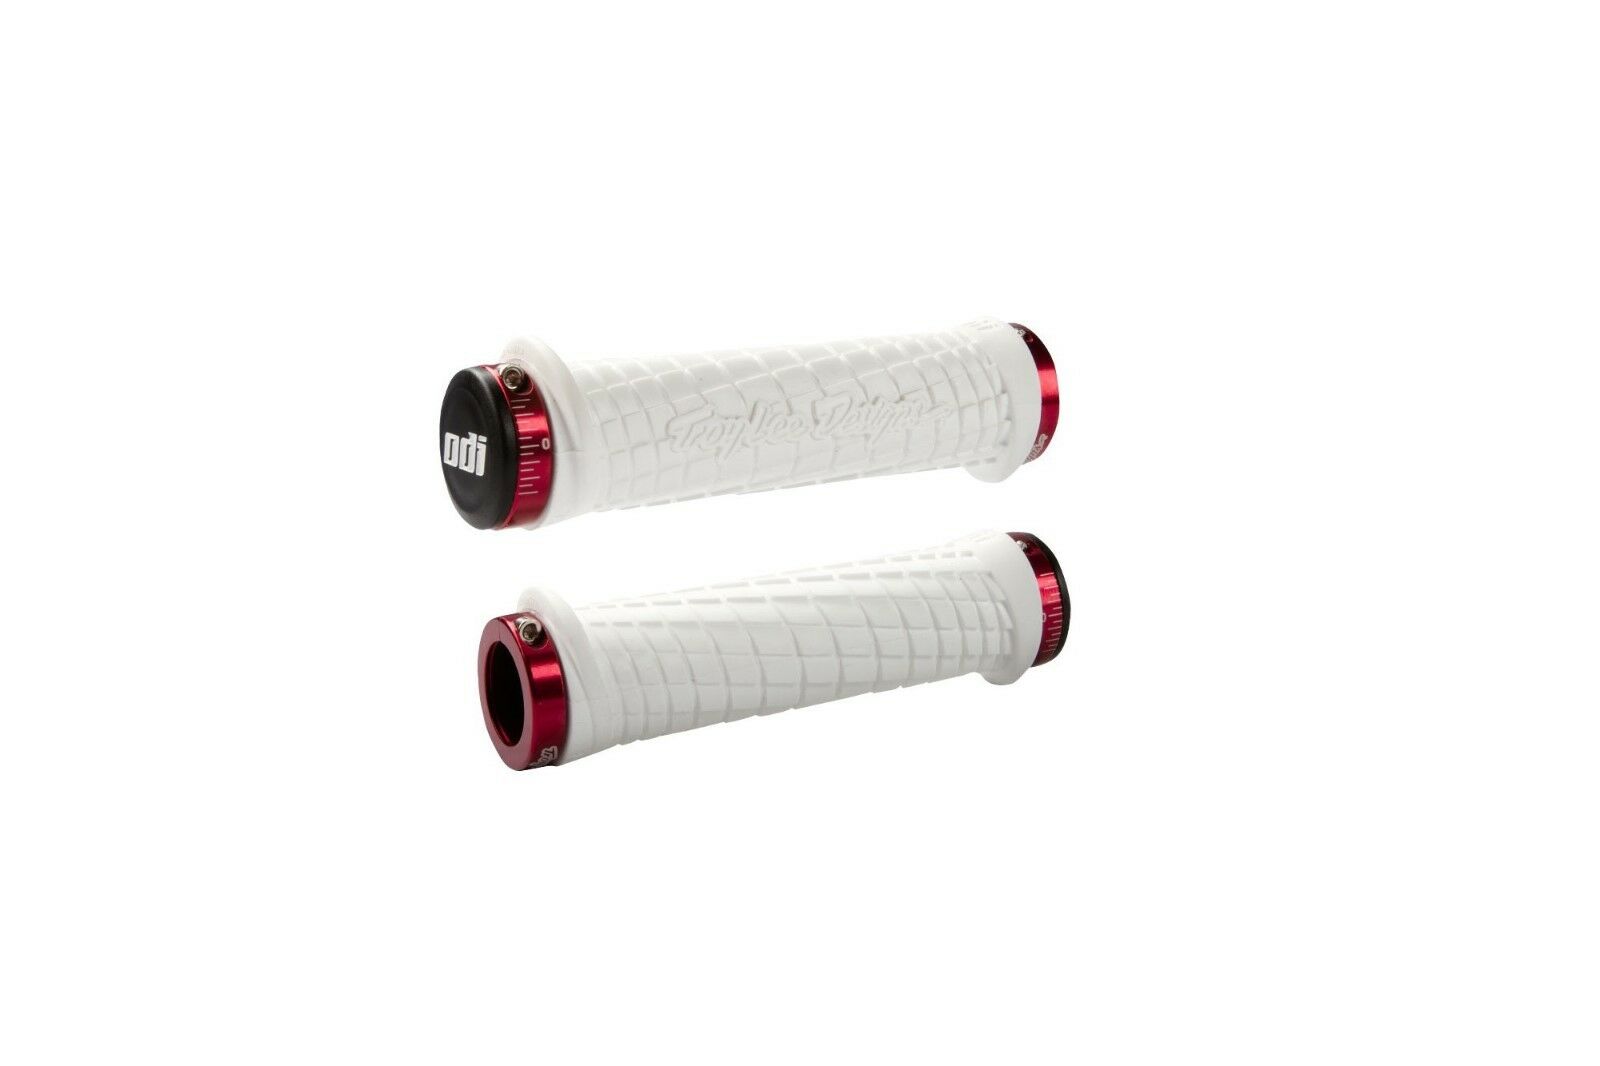 ODI Troy Lee Designs Lock-On BMX Grips - White w/ Red clamps - USA Made